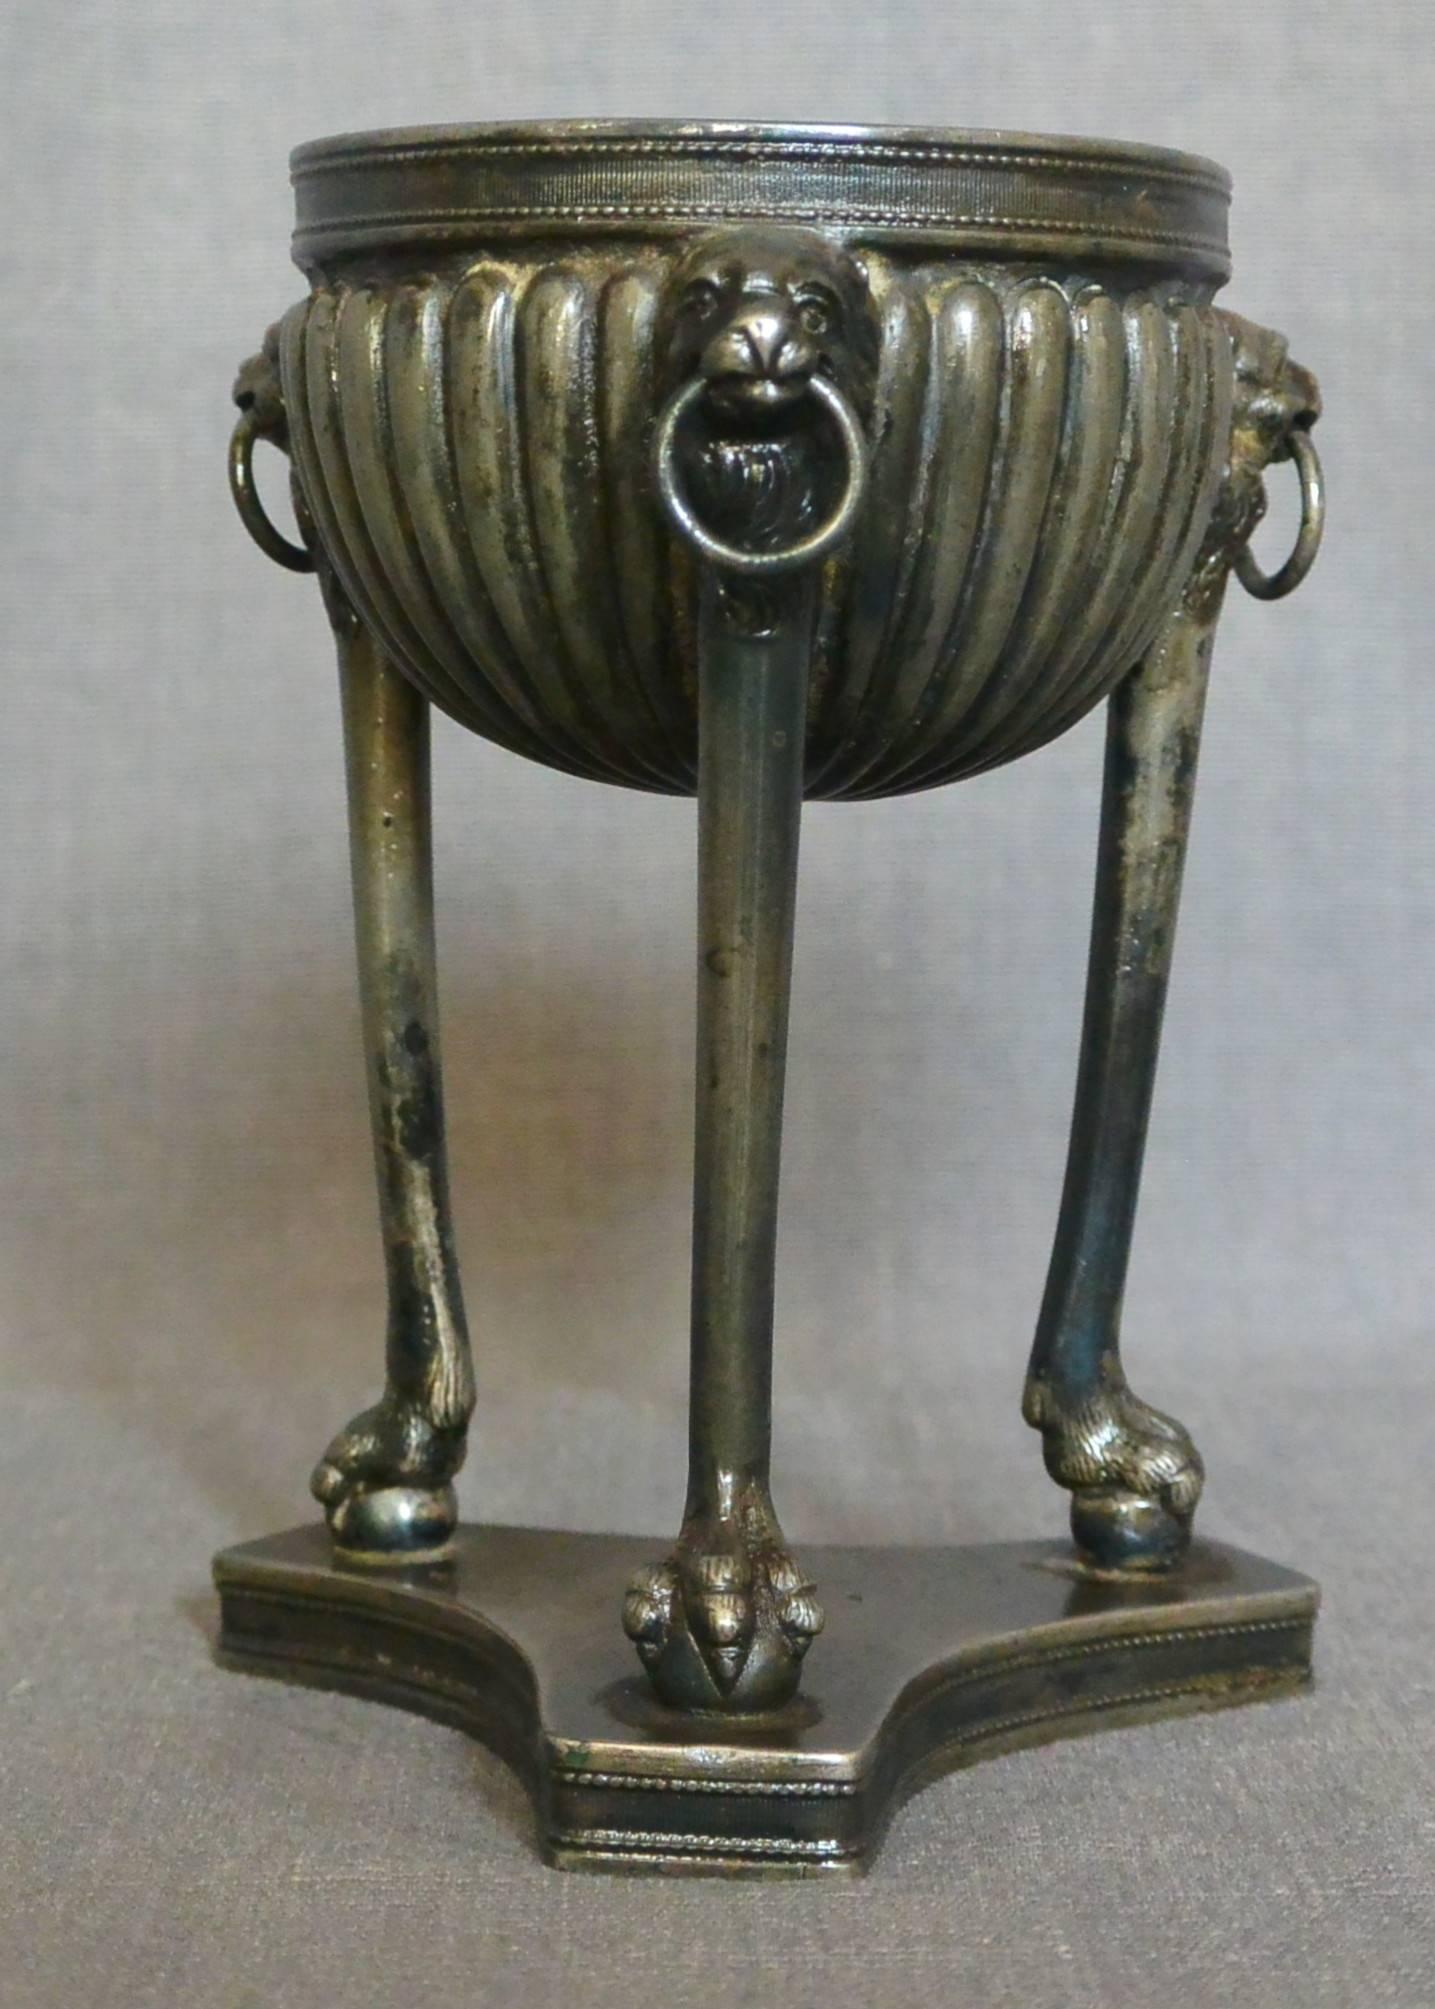 Grand Tour Neapolitan Tripod Oil Lamp. Bronze patinated metal oil lamp of tripod form with lion head masks with rings, supported by lion monopedia on ball terminals on conforming base, Italy, circa 1820.
Dimension: 4.75